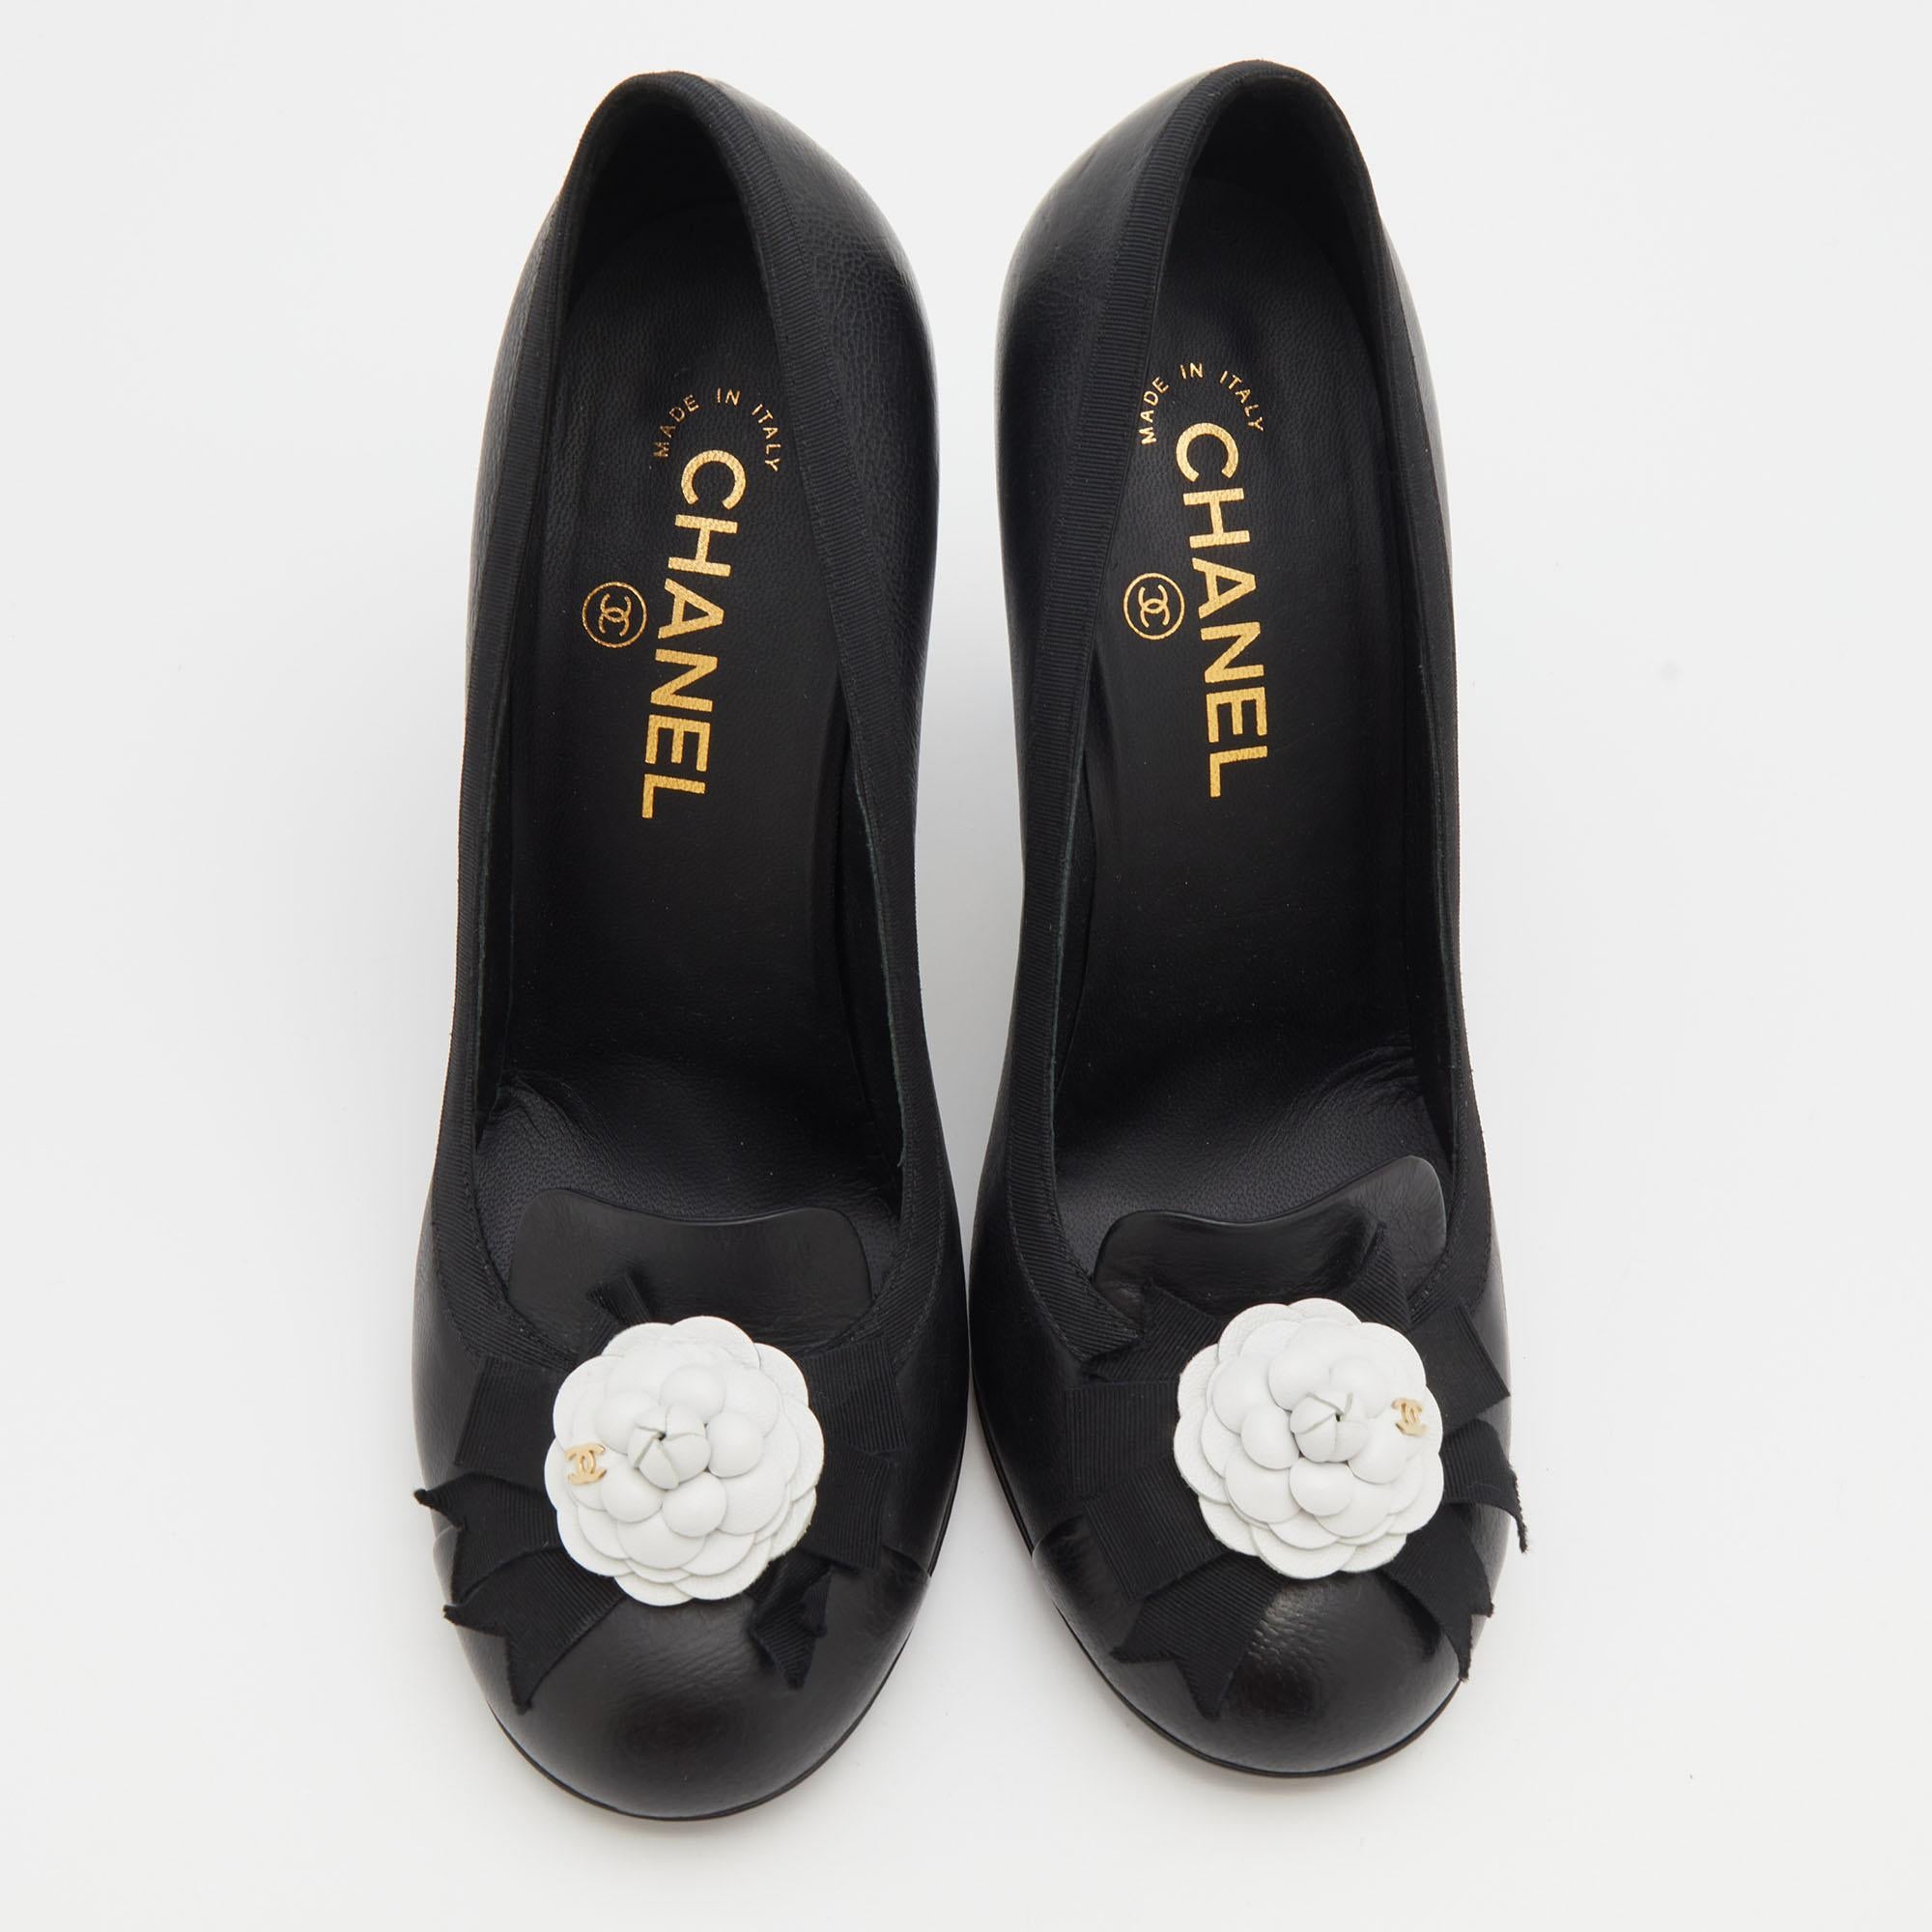 This pair of pumps from the house of Chanel is just what you need to take your style quotient a few notches higher. Made from smooth black leather, their versatile design features round toes with vamps embellished with the signature Camellia flower